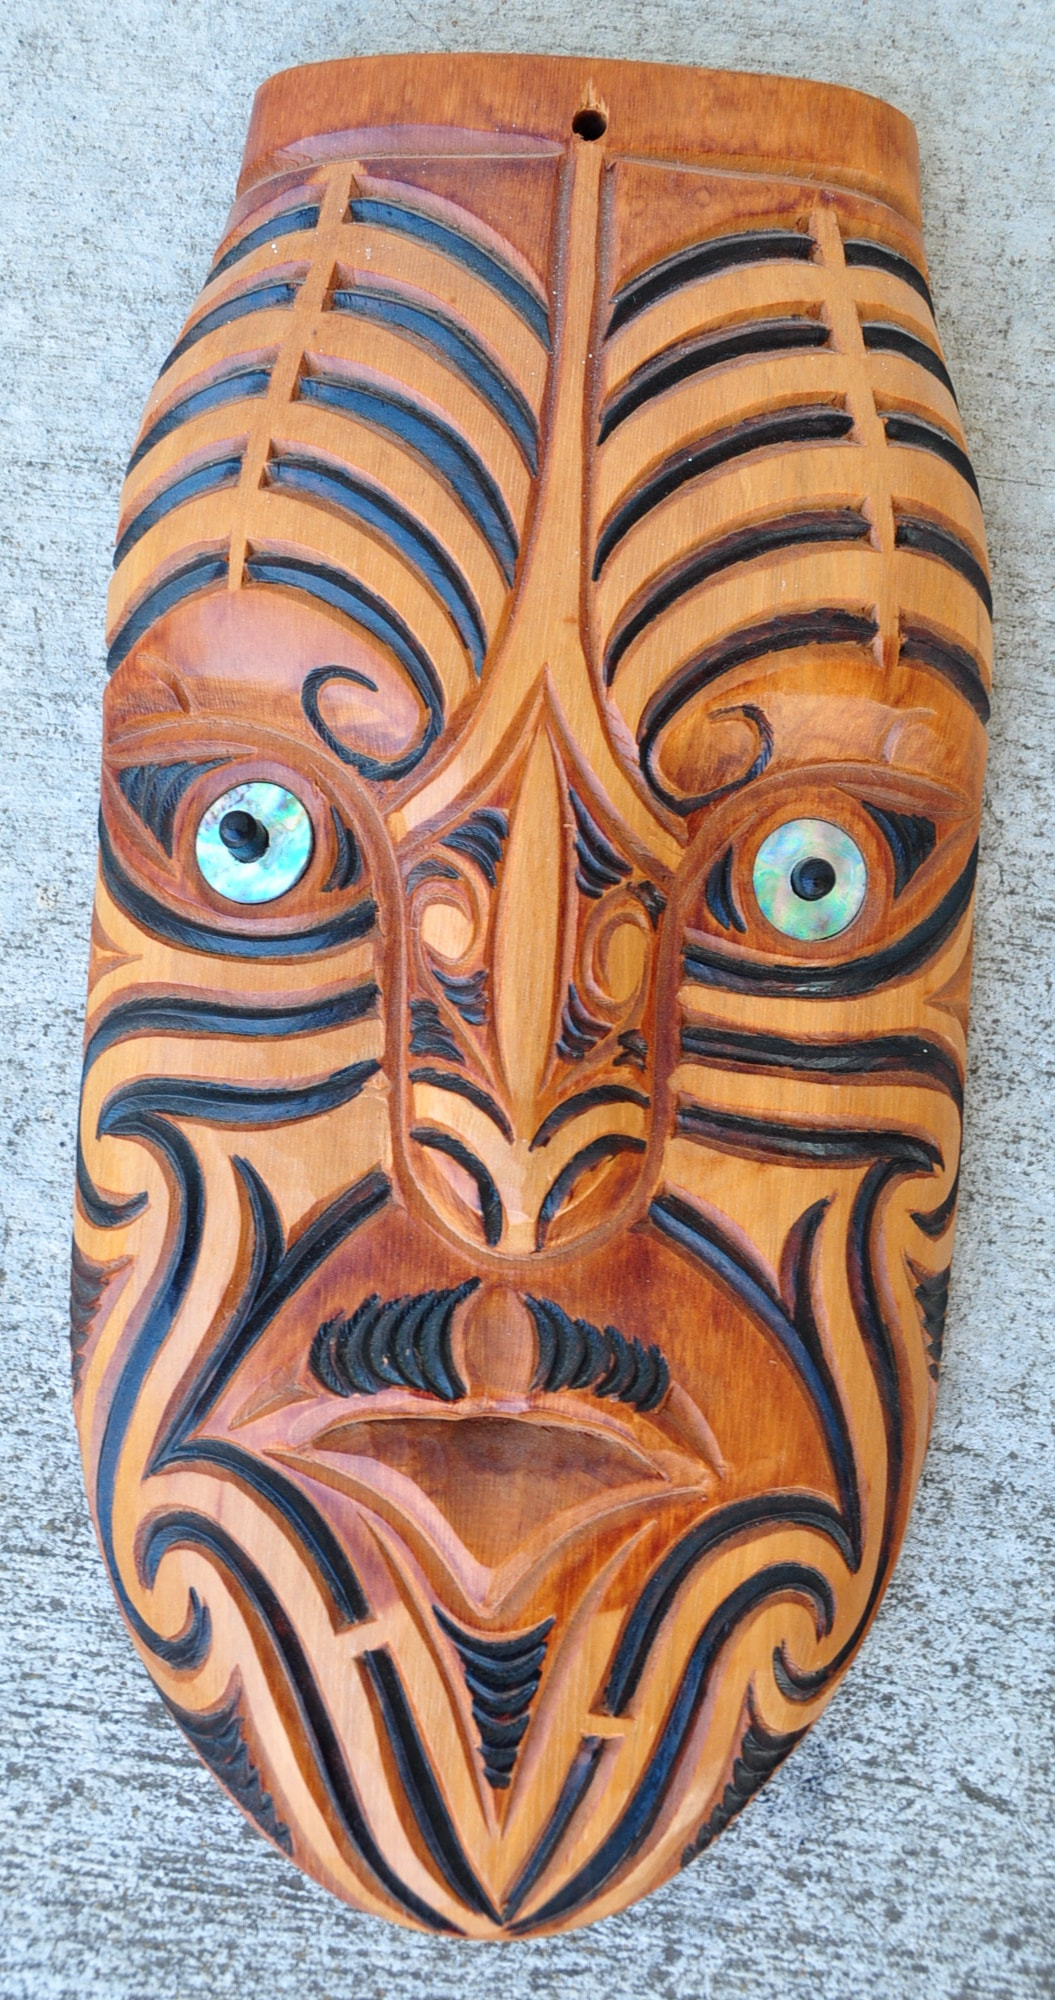 Maori carved wooden mask